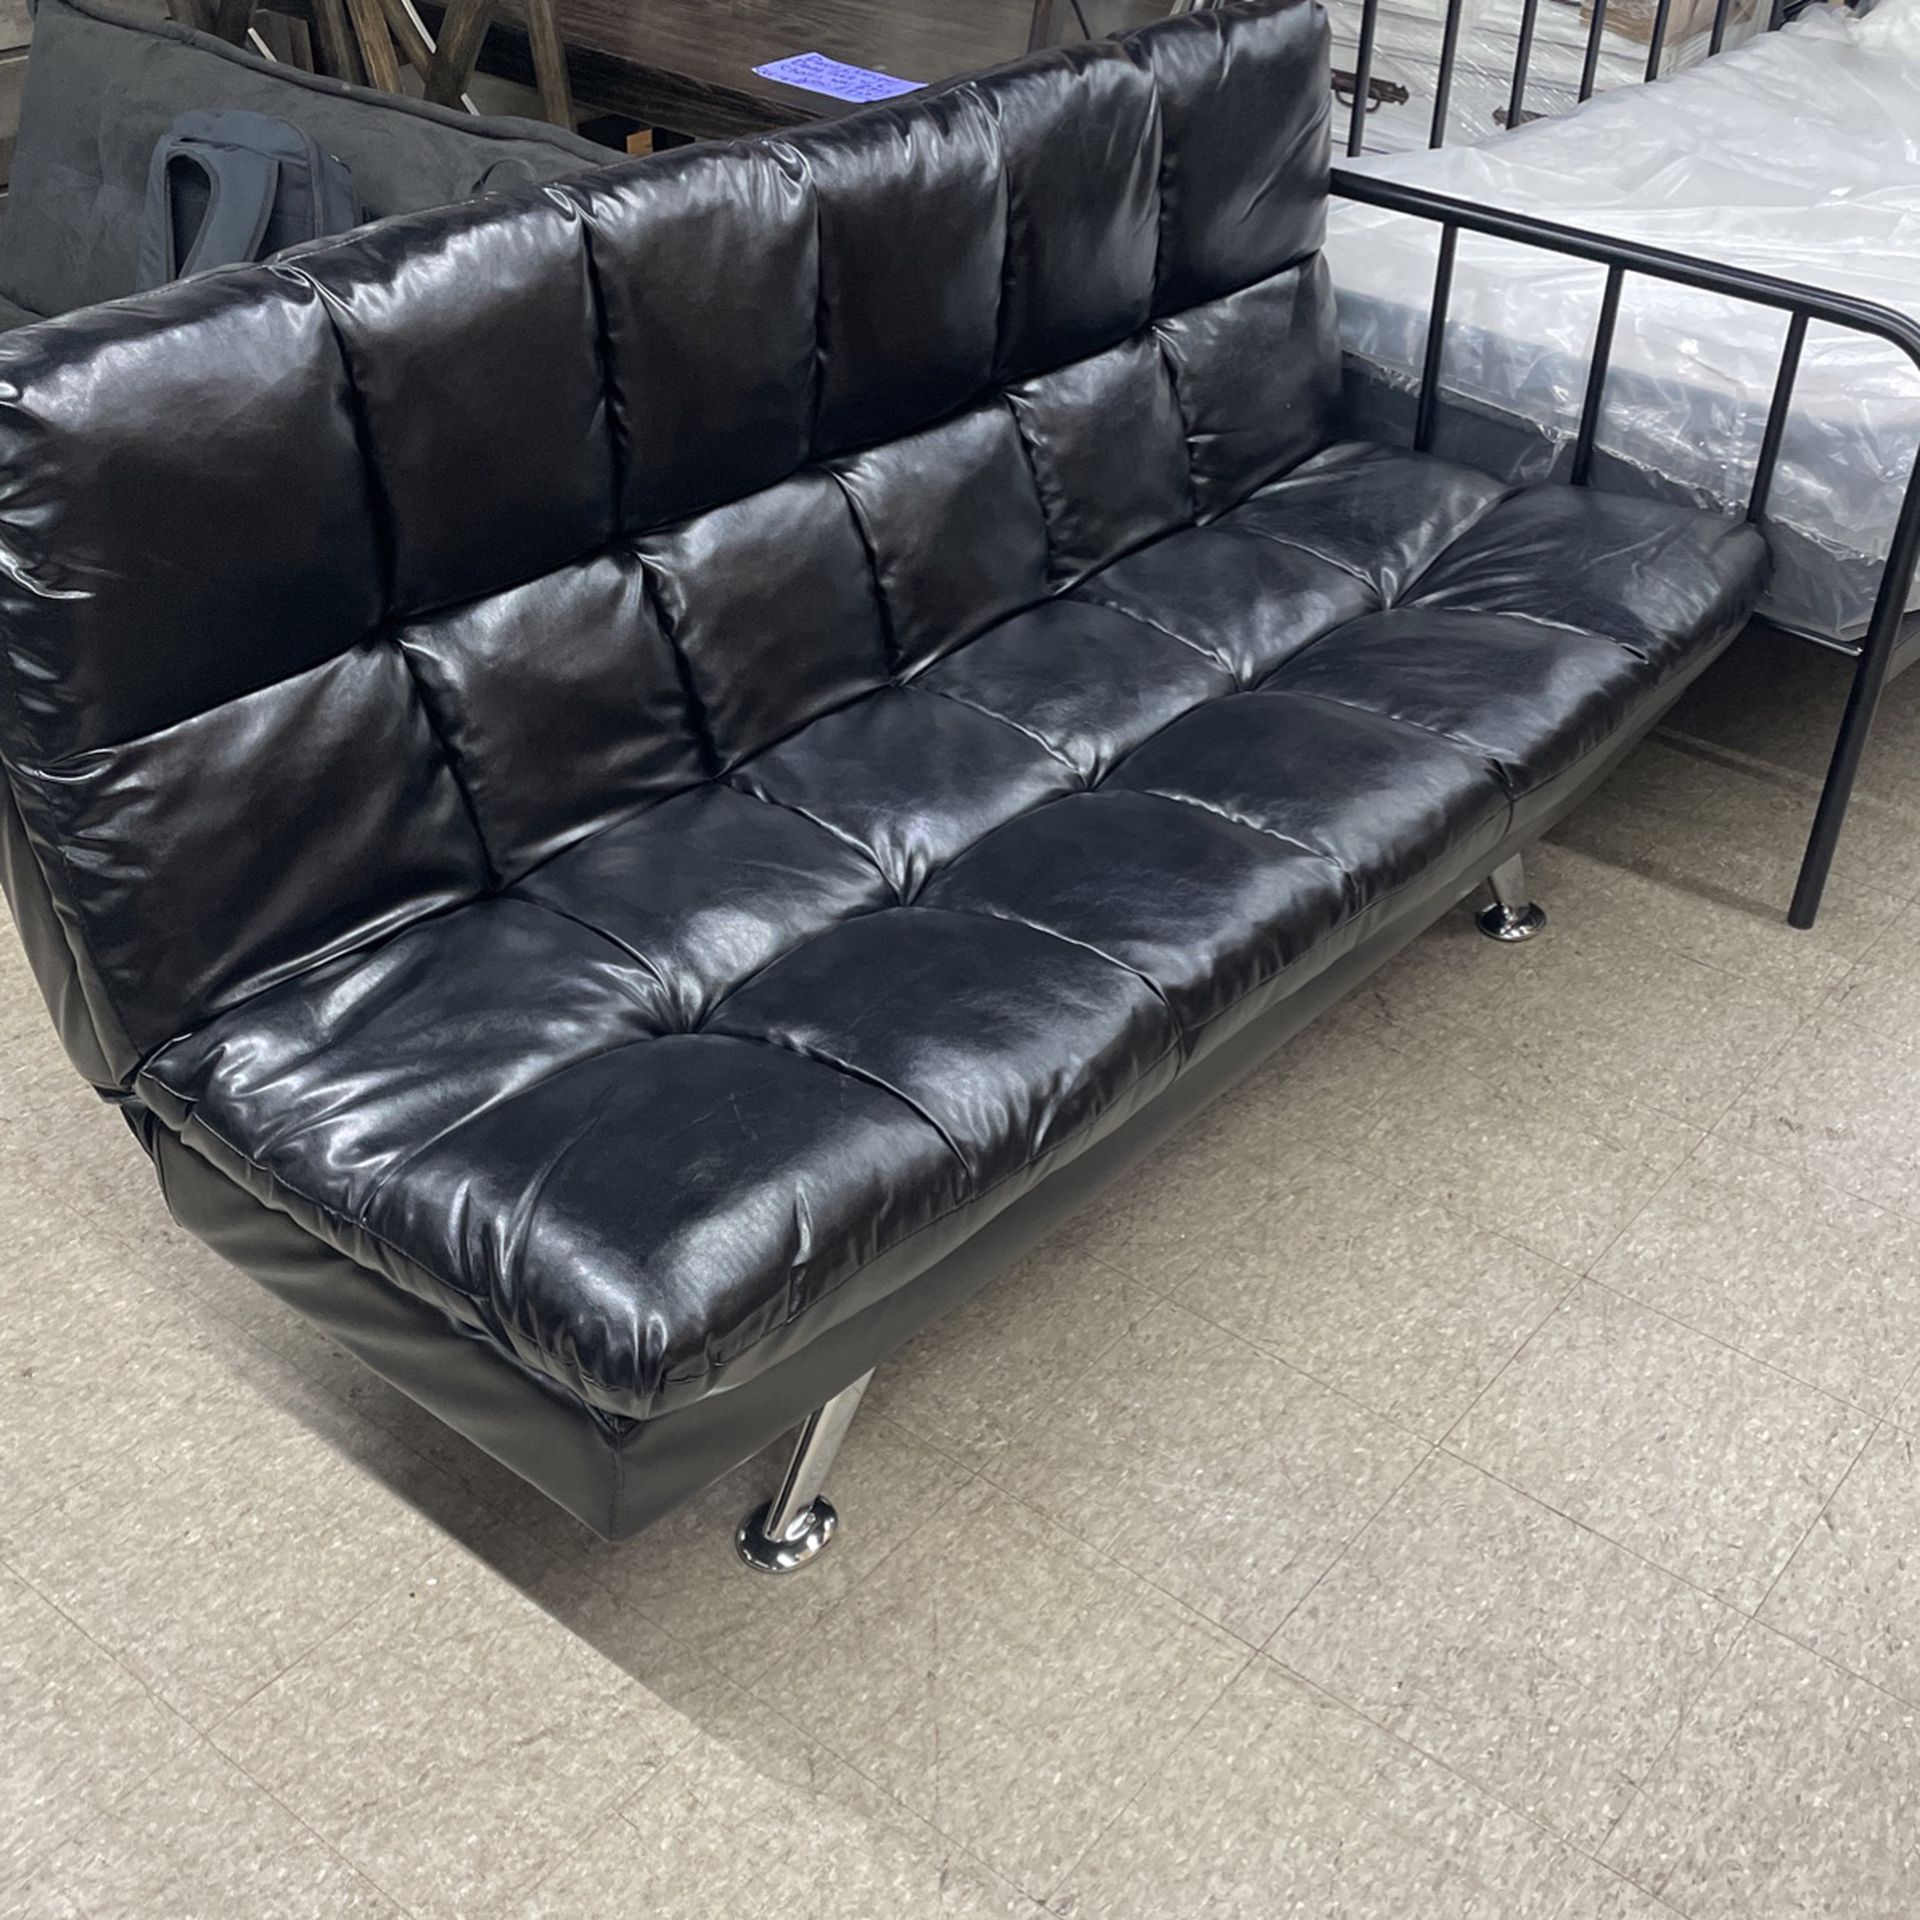 Futon Leather Full Bed On SALE!!! $50 Down Take It Home Today!!! 